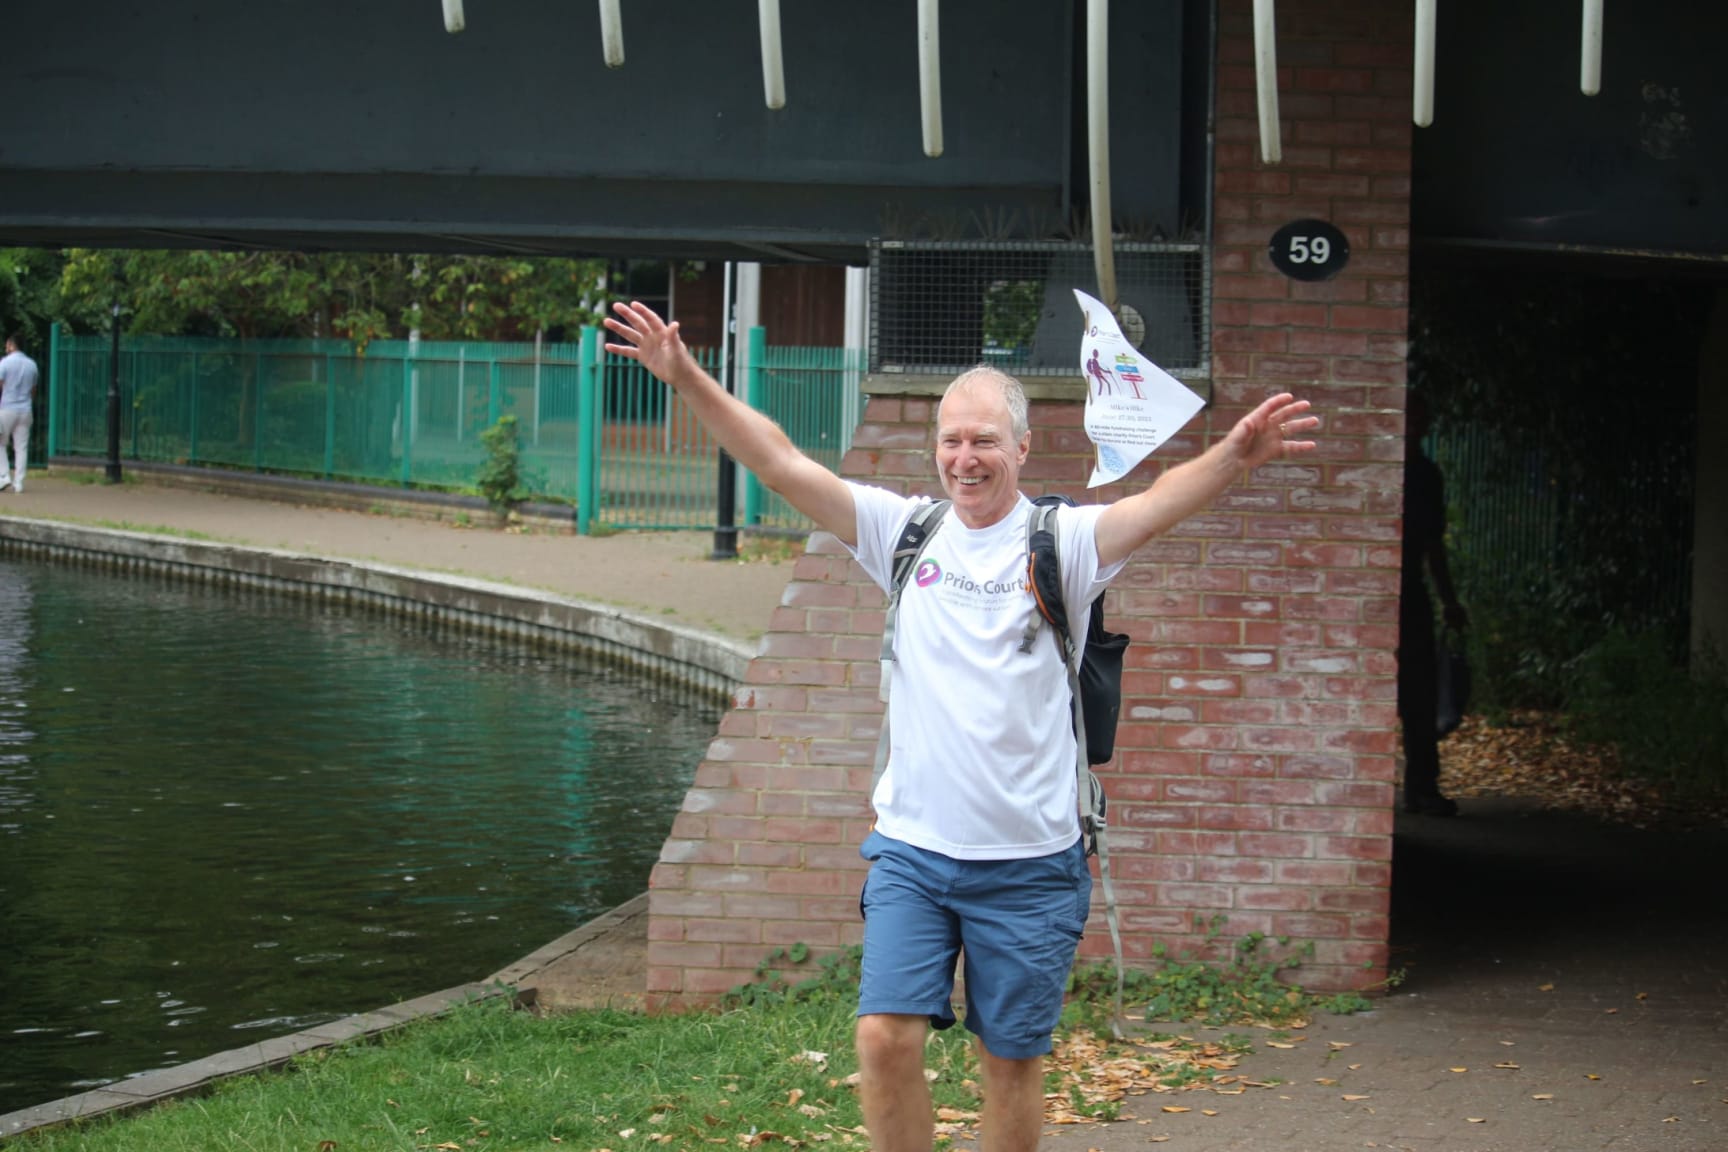 a man dressed in a white t-shirt walks under a bridge next to a canal. his arms are raised in celebration